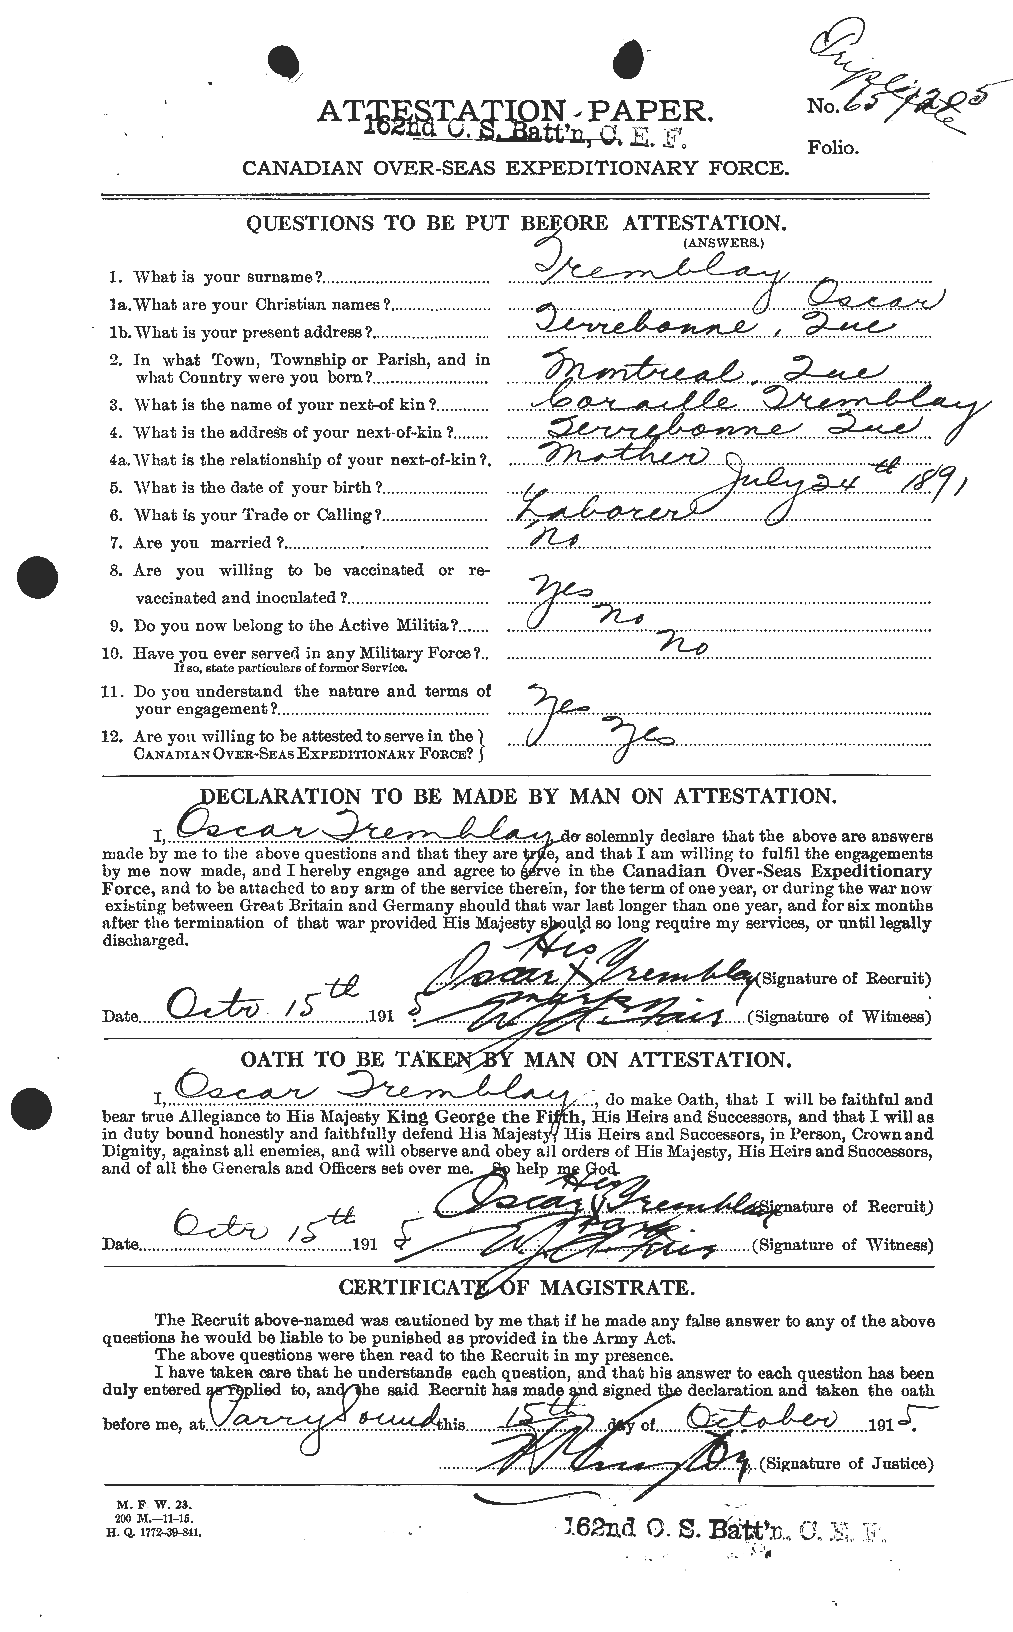 Personnel Records of the First World War - CEF 639219a